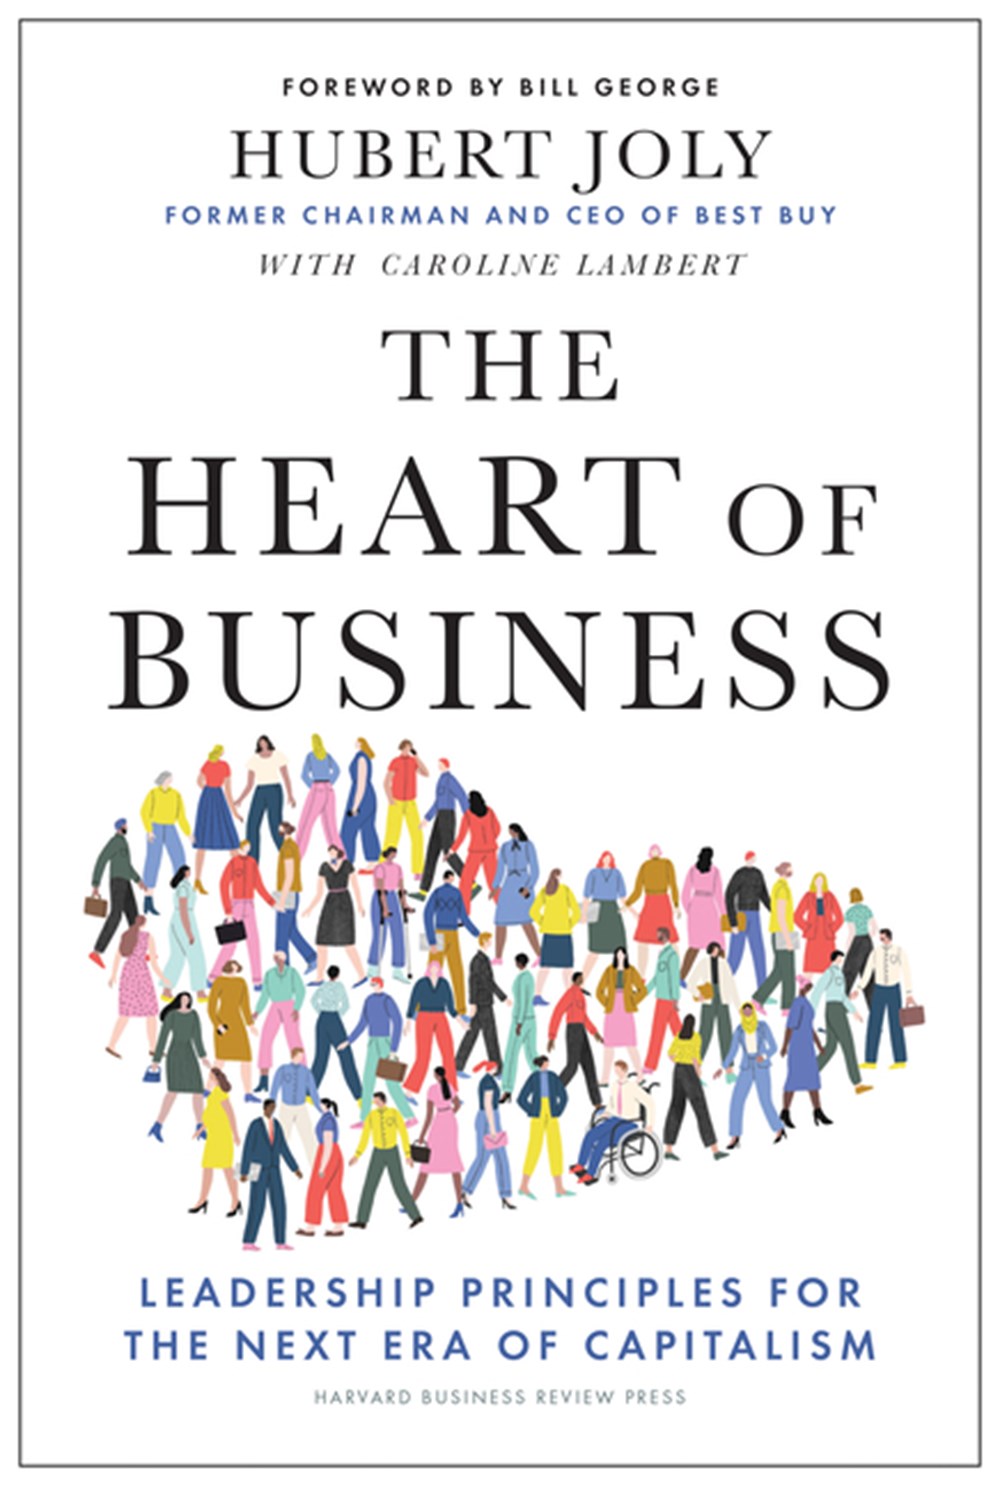 Heart of Business Leadership Principles for the Next Era of Capitalism